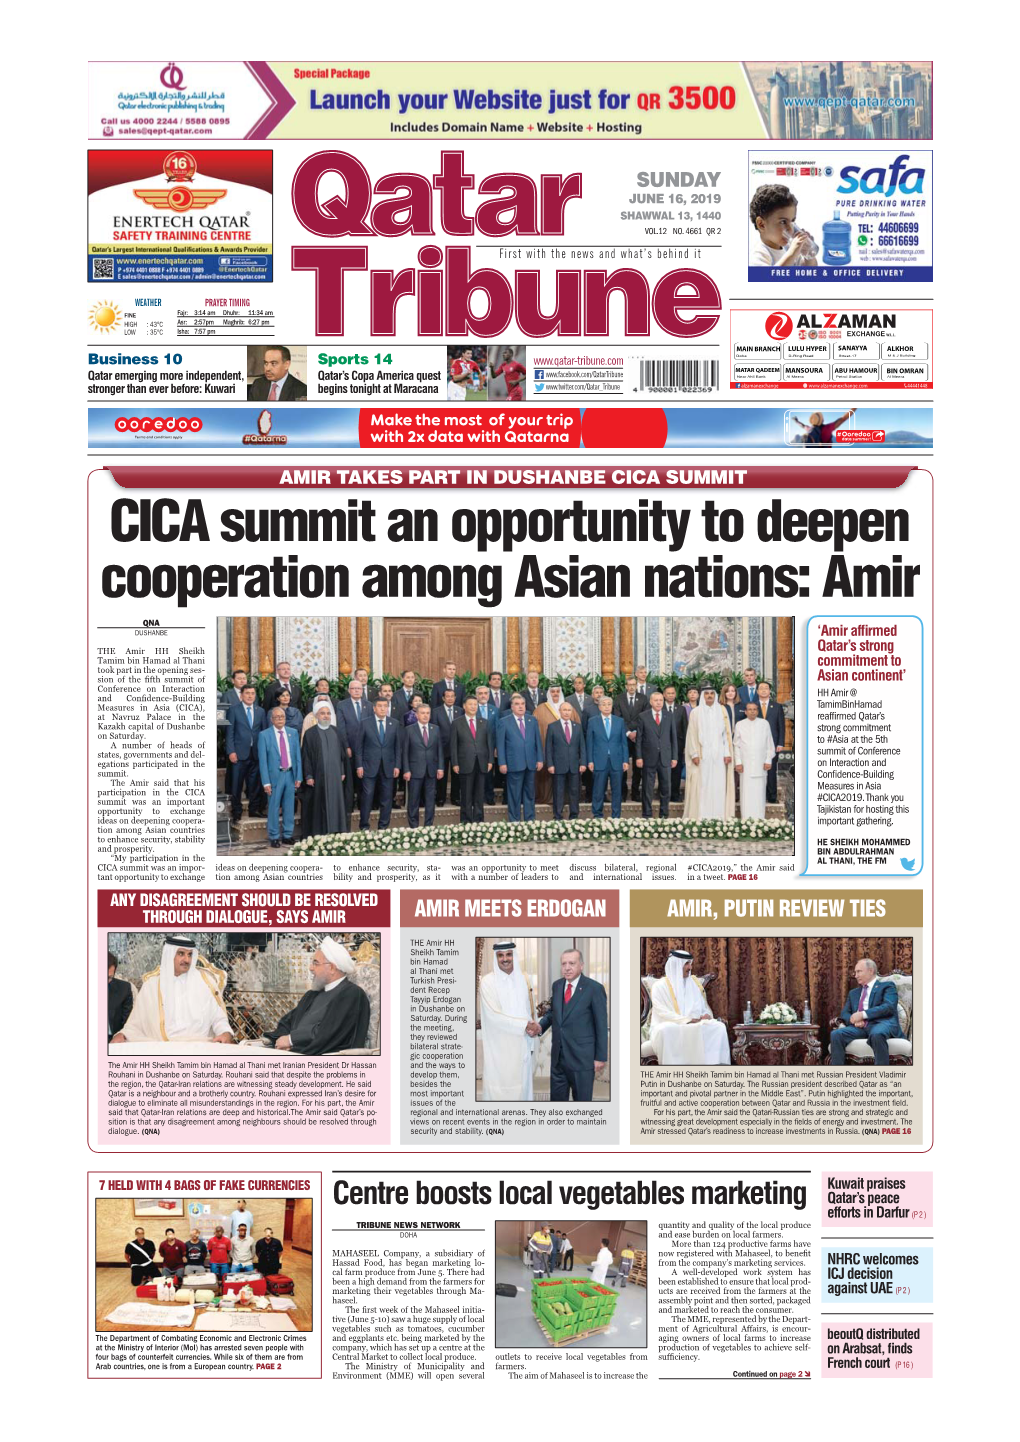 CICA Summit an Opportunity to Deepen Cooperation Among Asian Nations: Amir